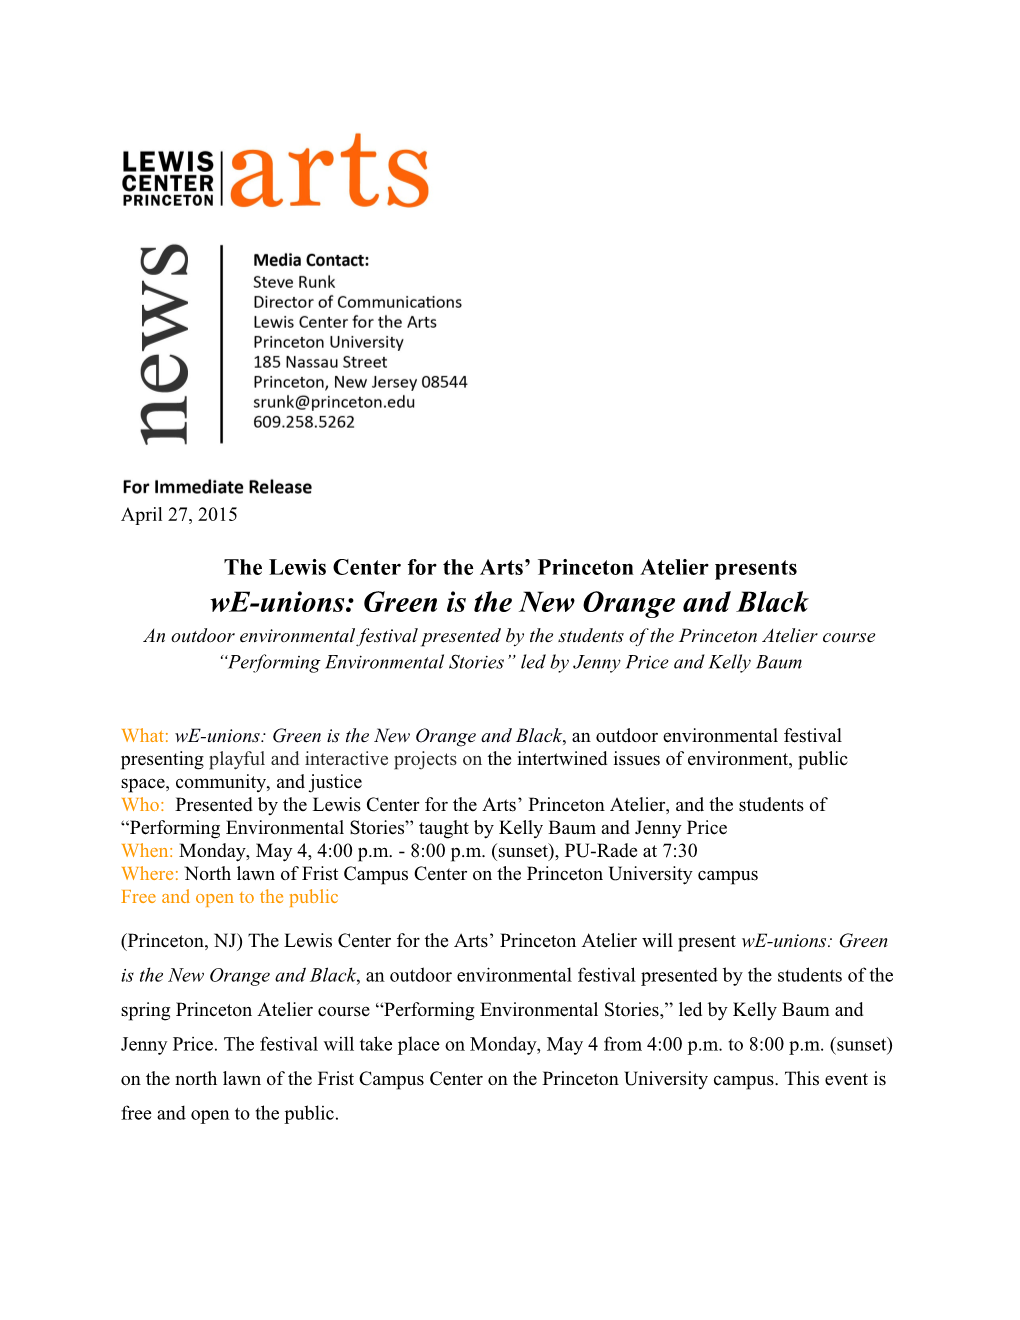 The Lewis Center for the Arts Princeton Atelier Presents